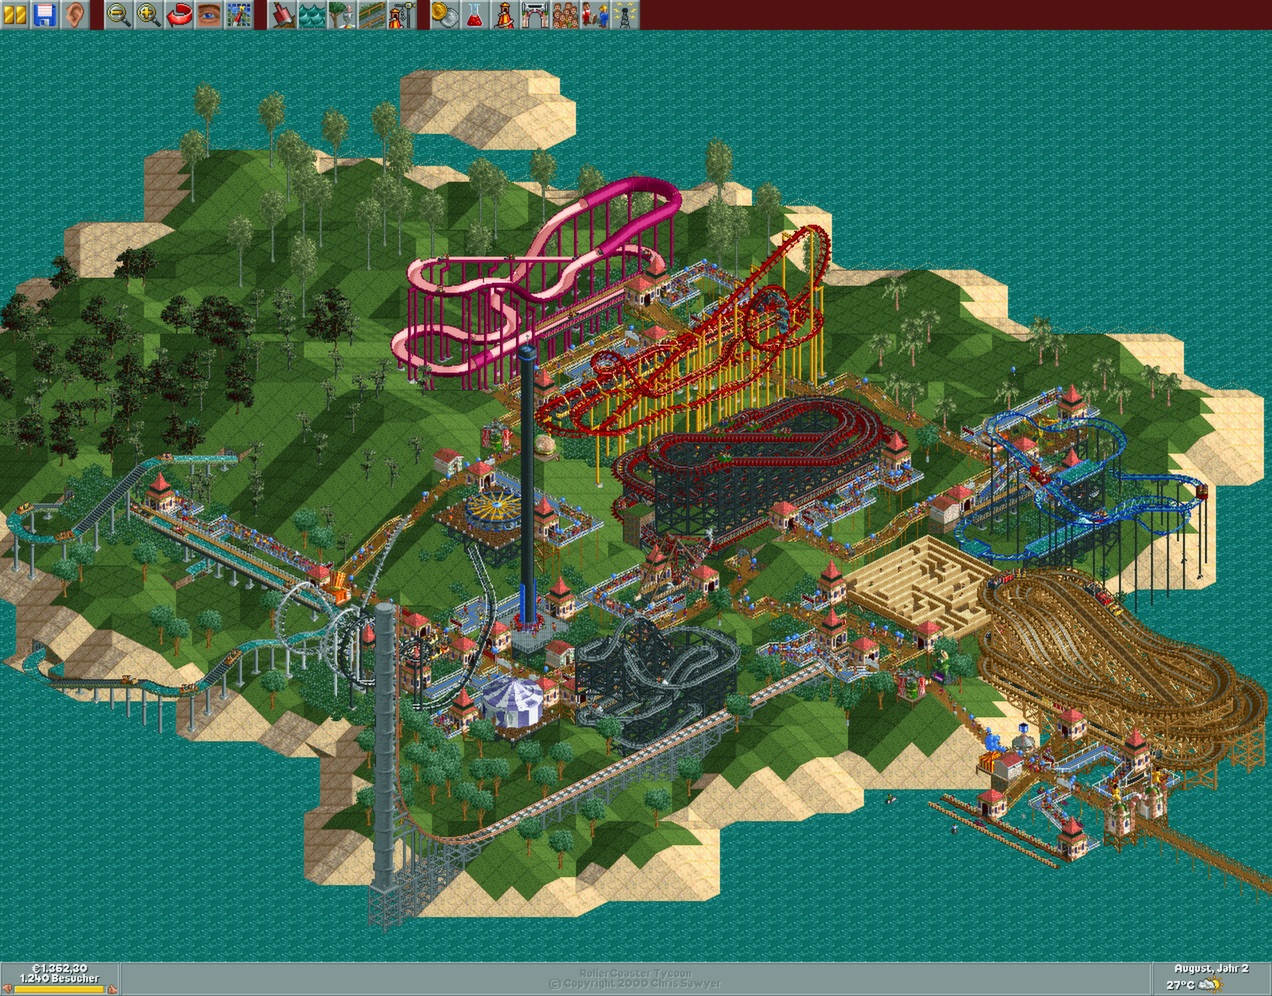 download rollercoaster tycoon deluxe for mac free